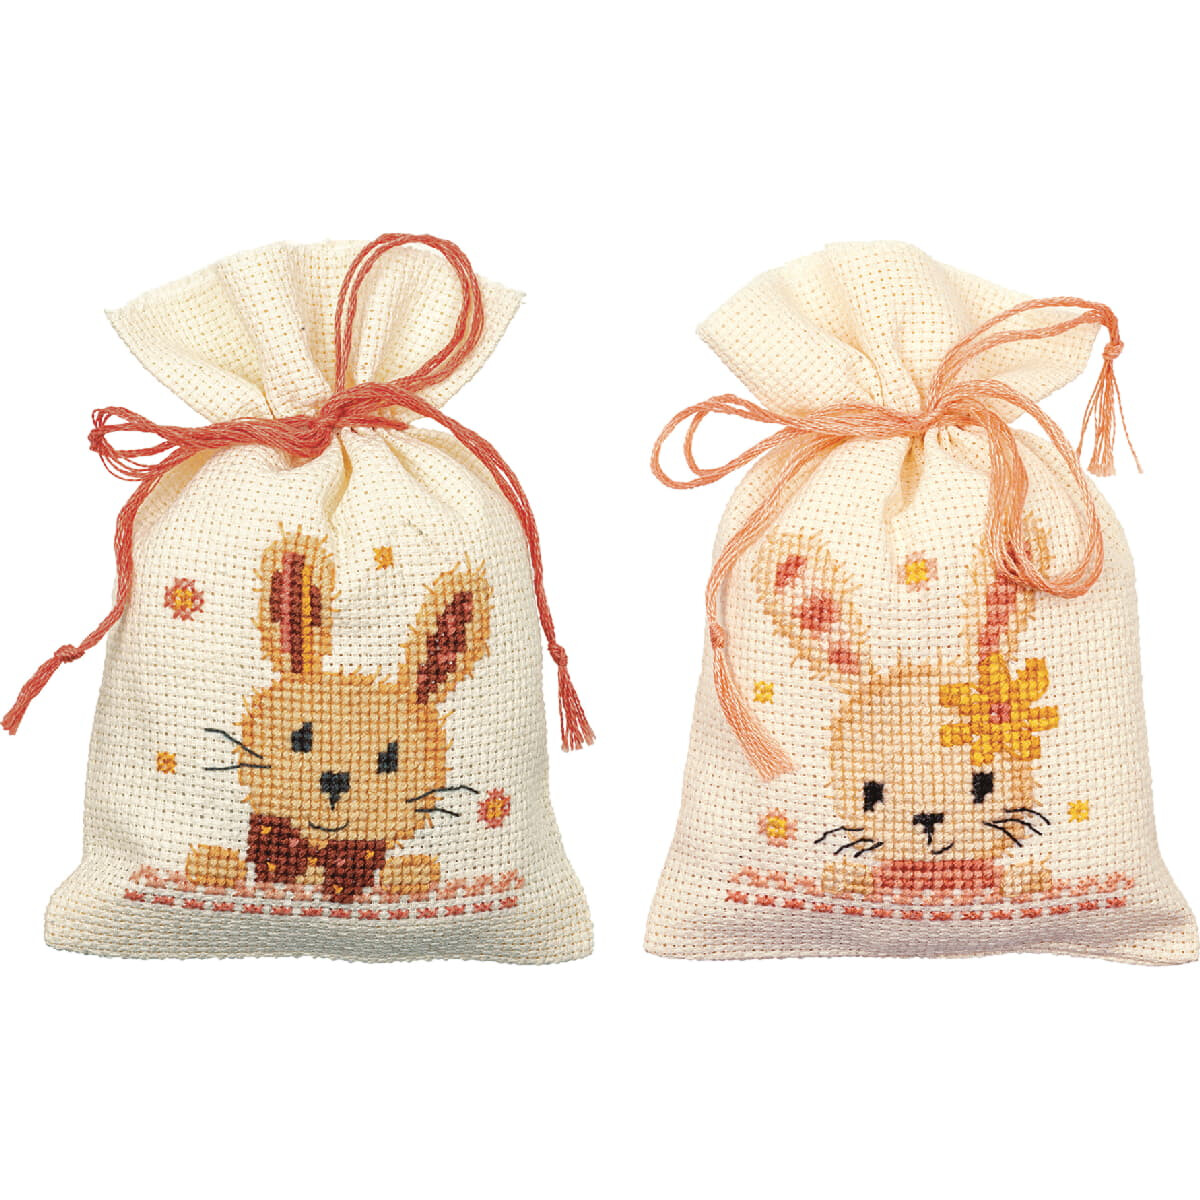 Vervaco herbal bags counted cross stitch kit "Sweet...